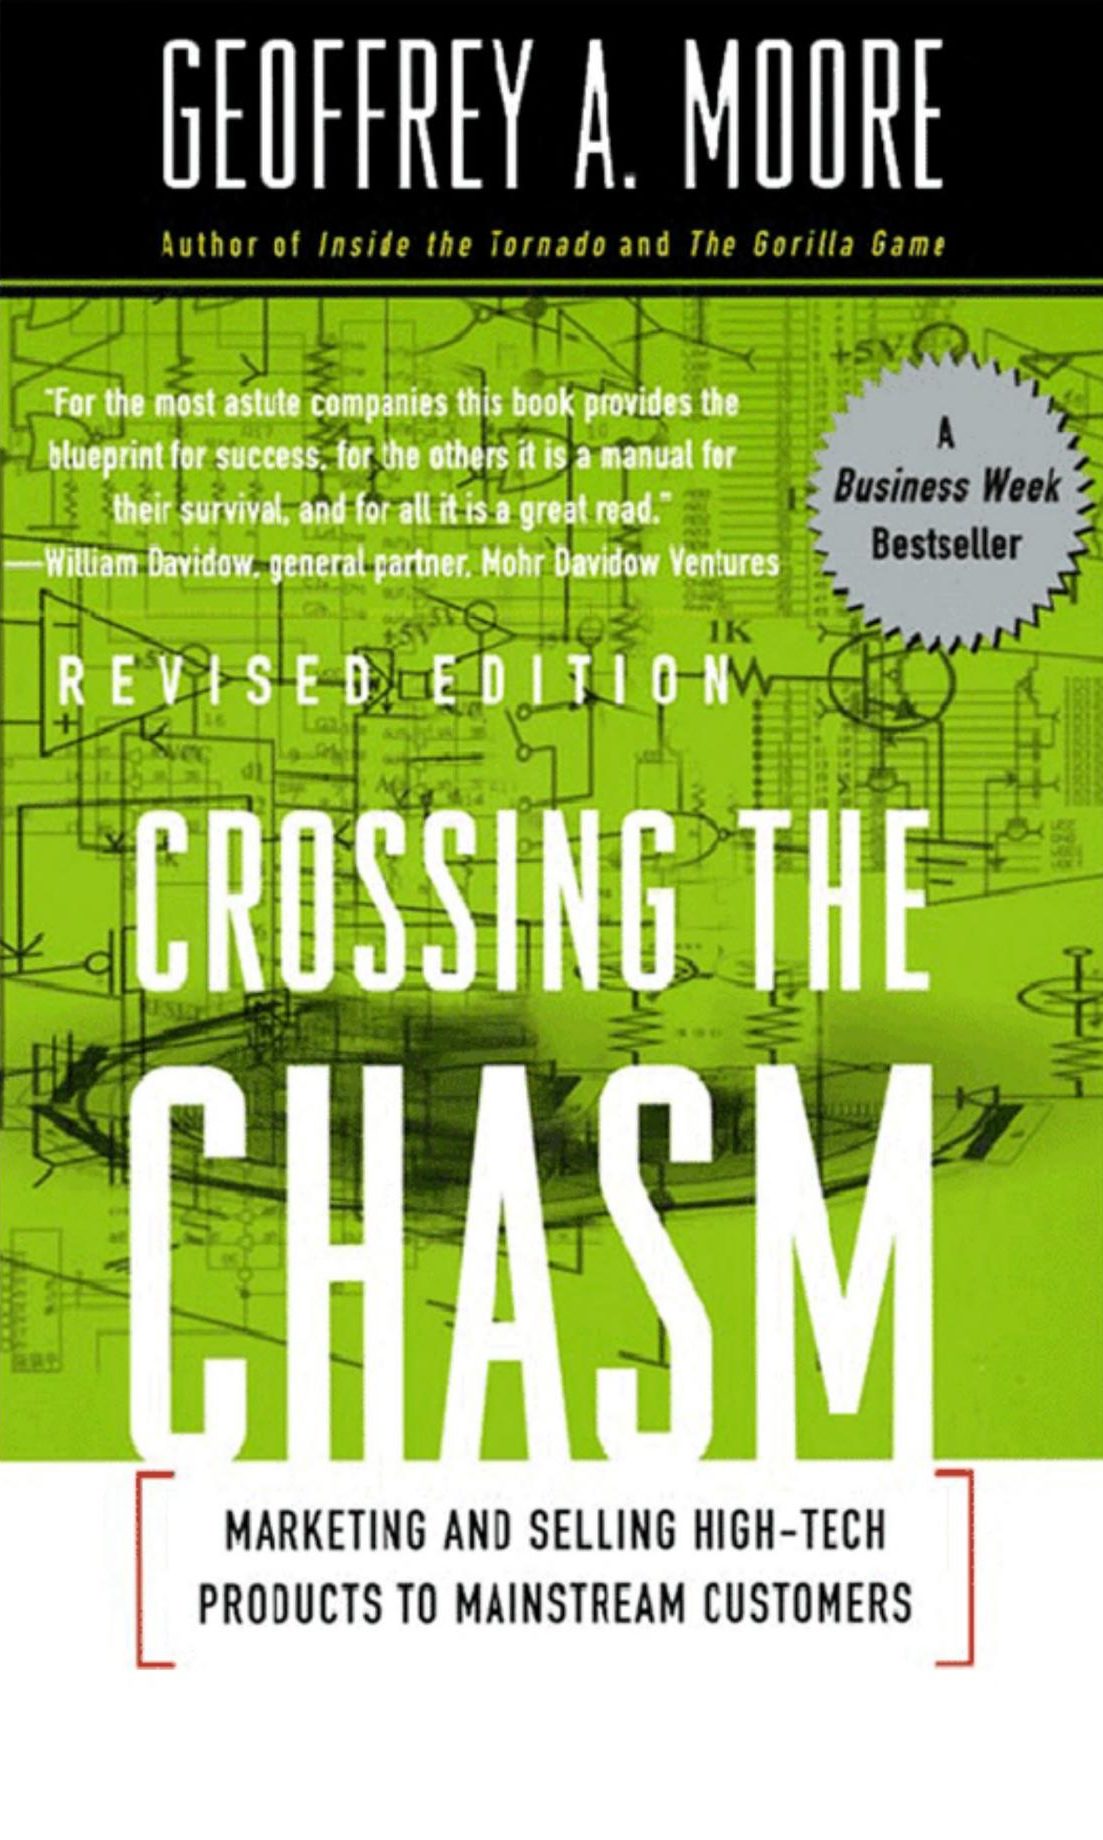 Crossing the Chasm- Marketing and Selling High-Tech Products to Mainstream Customers by Geoffrey A. Moore